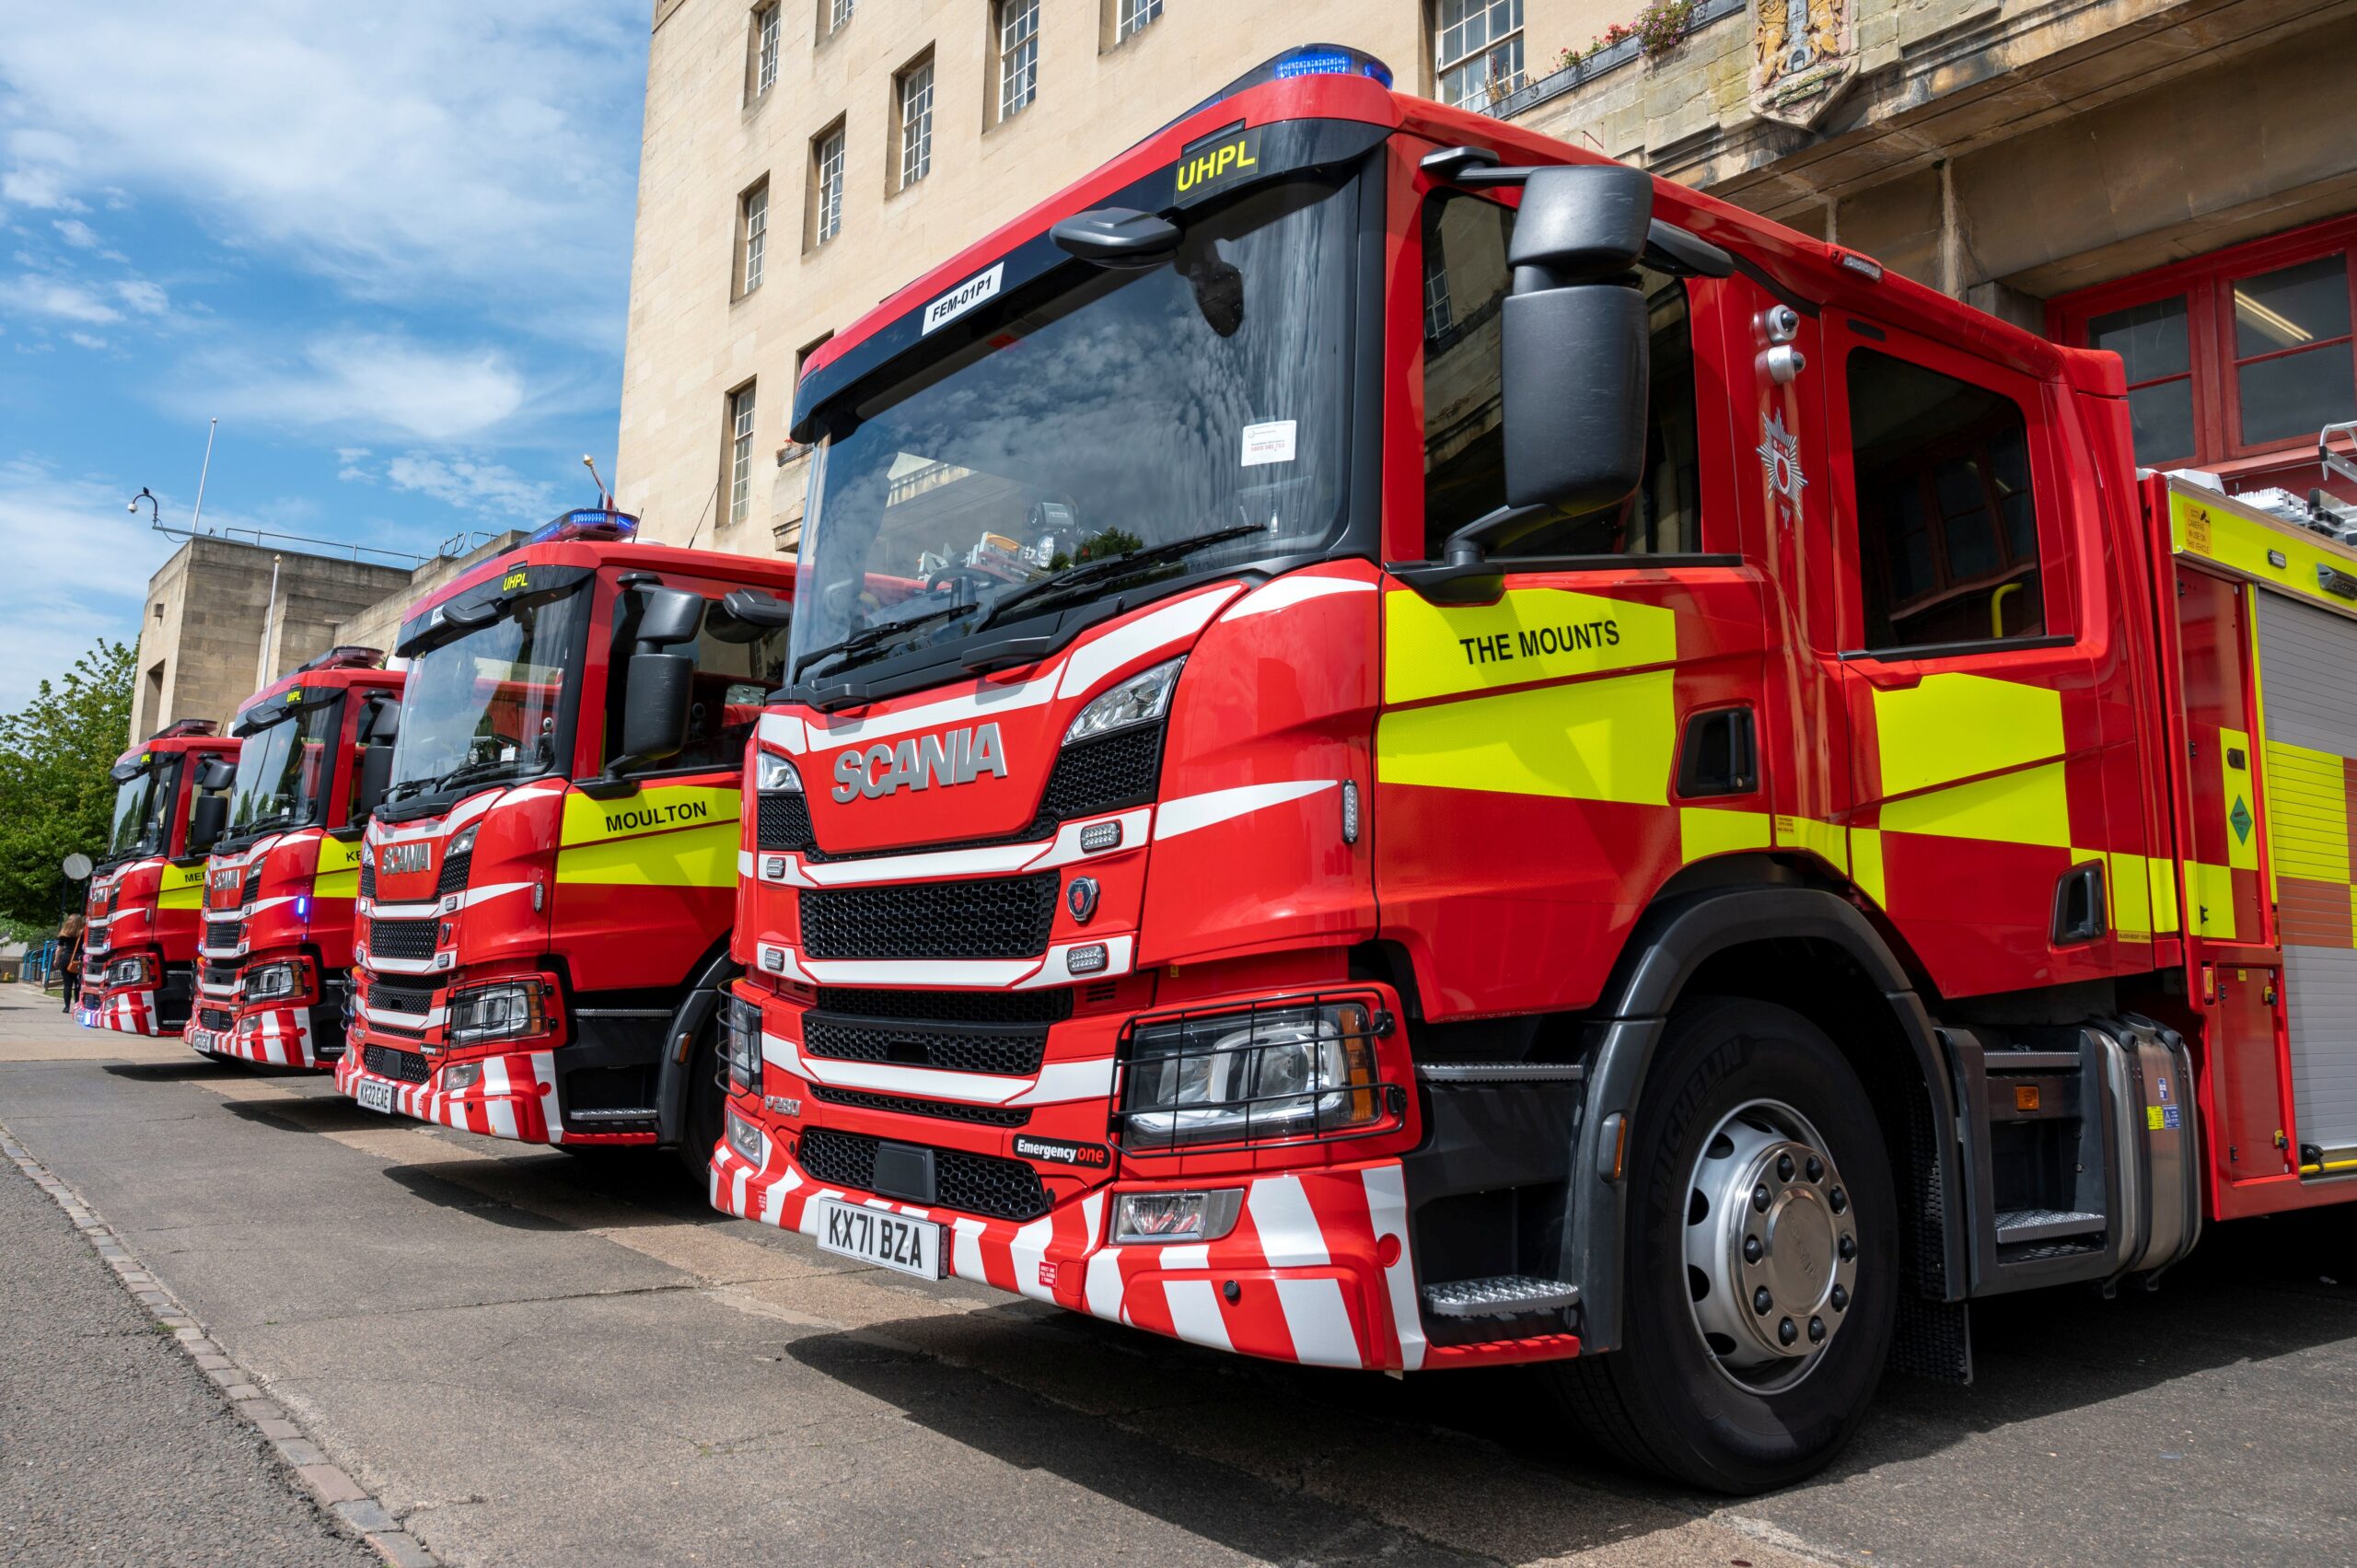 Four new fire engines pictured outside The Mounts fire station in Northampton in 2022